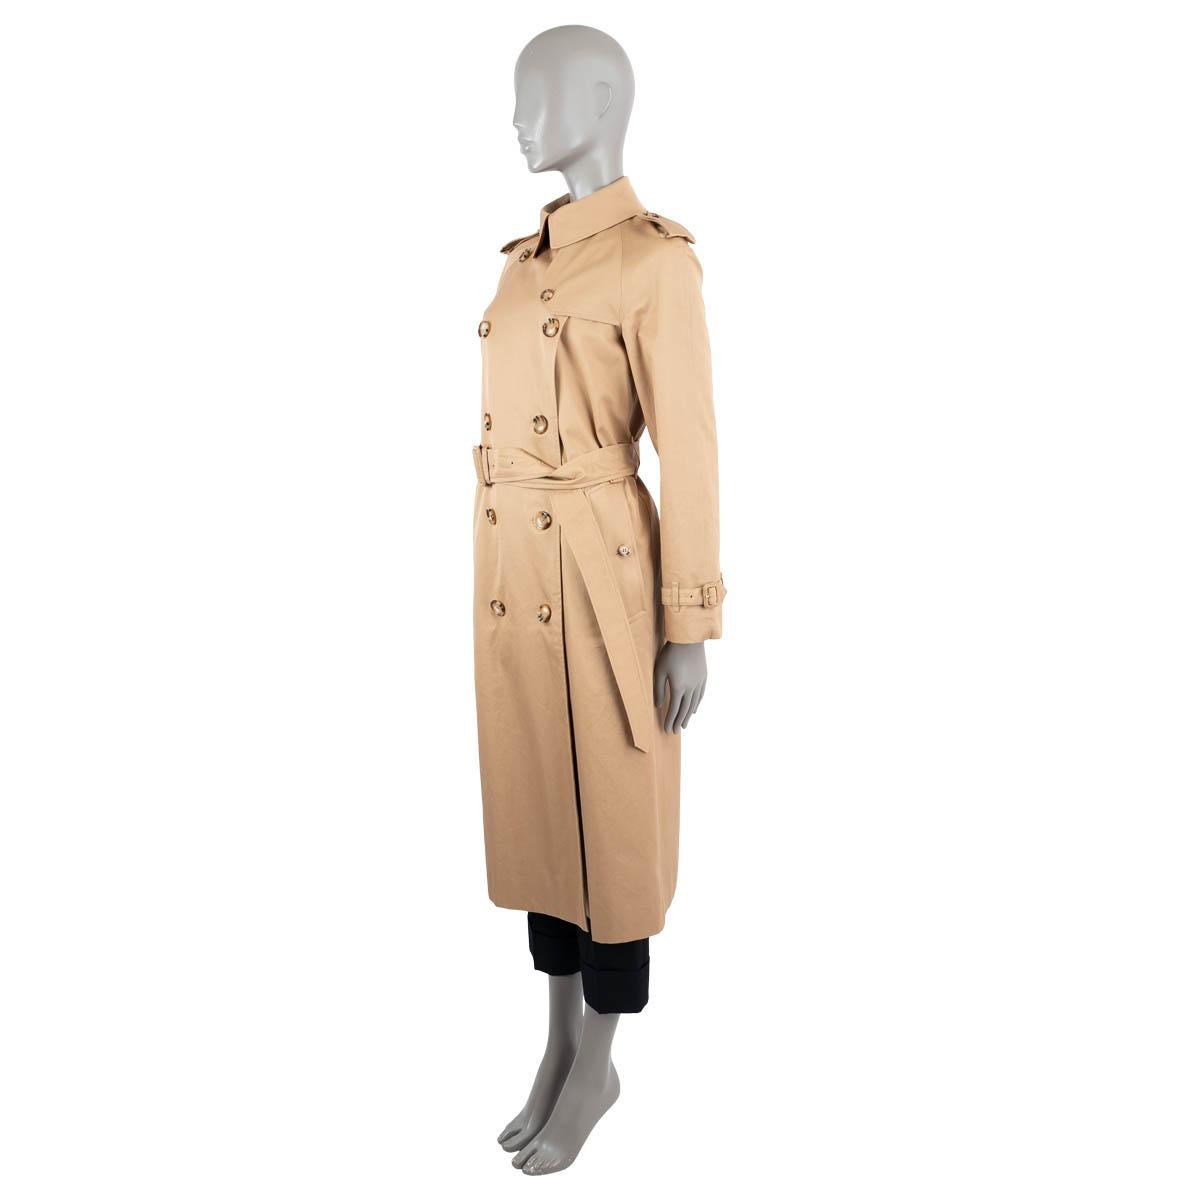 100% authentic Burberry the long waterloo heritage trench coat in camel cotton (100%) with shoulders and cuffs epaulettes and detachable belt. Closes with one hook and one button at the neck and buttons on the front, with two buttoned flap pockets